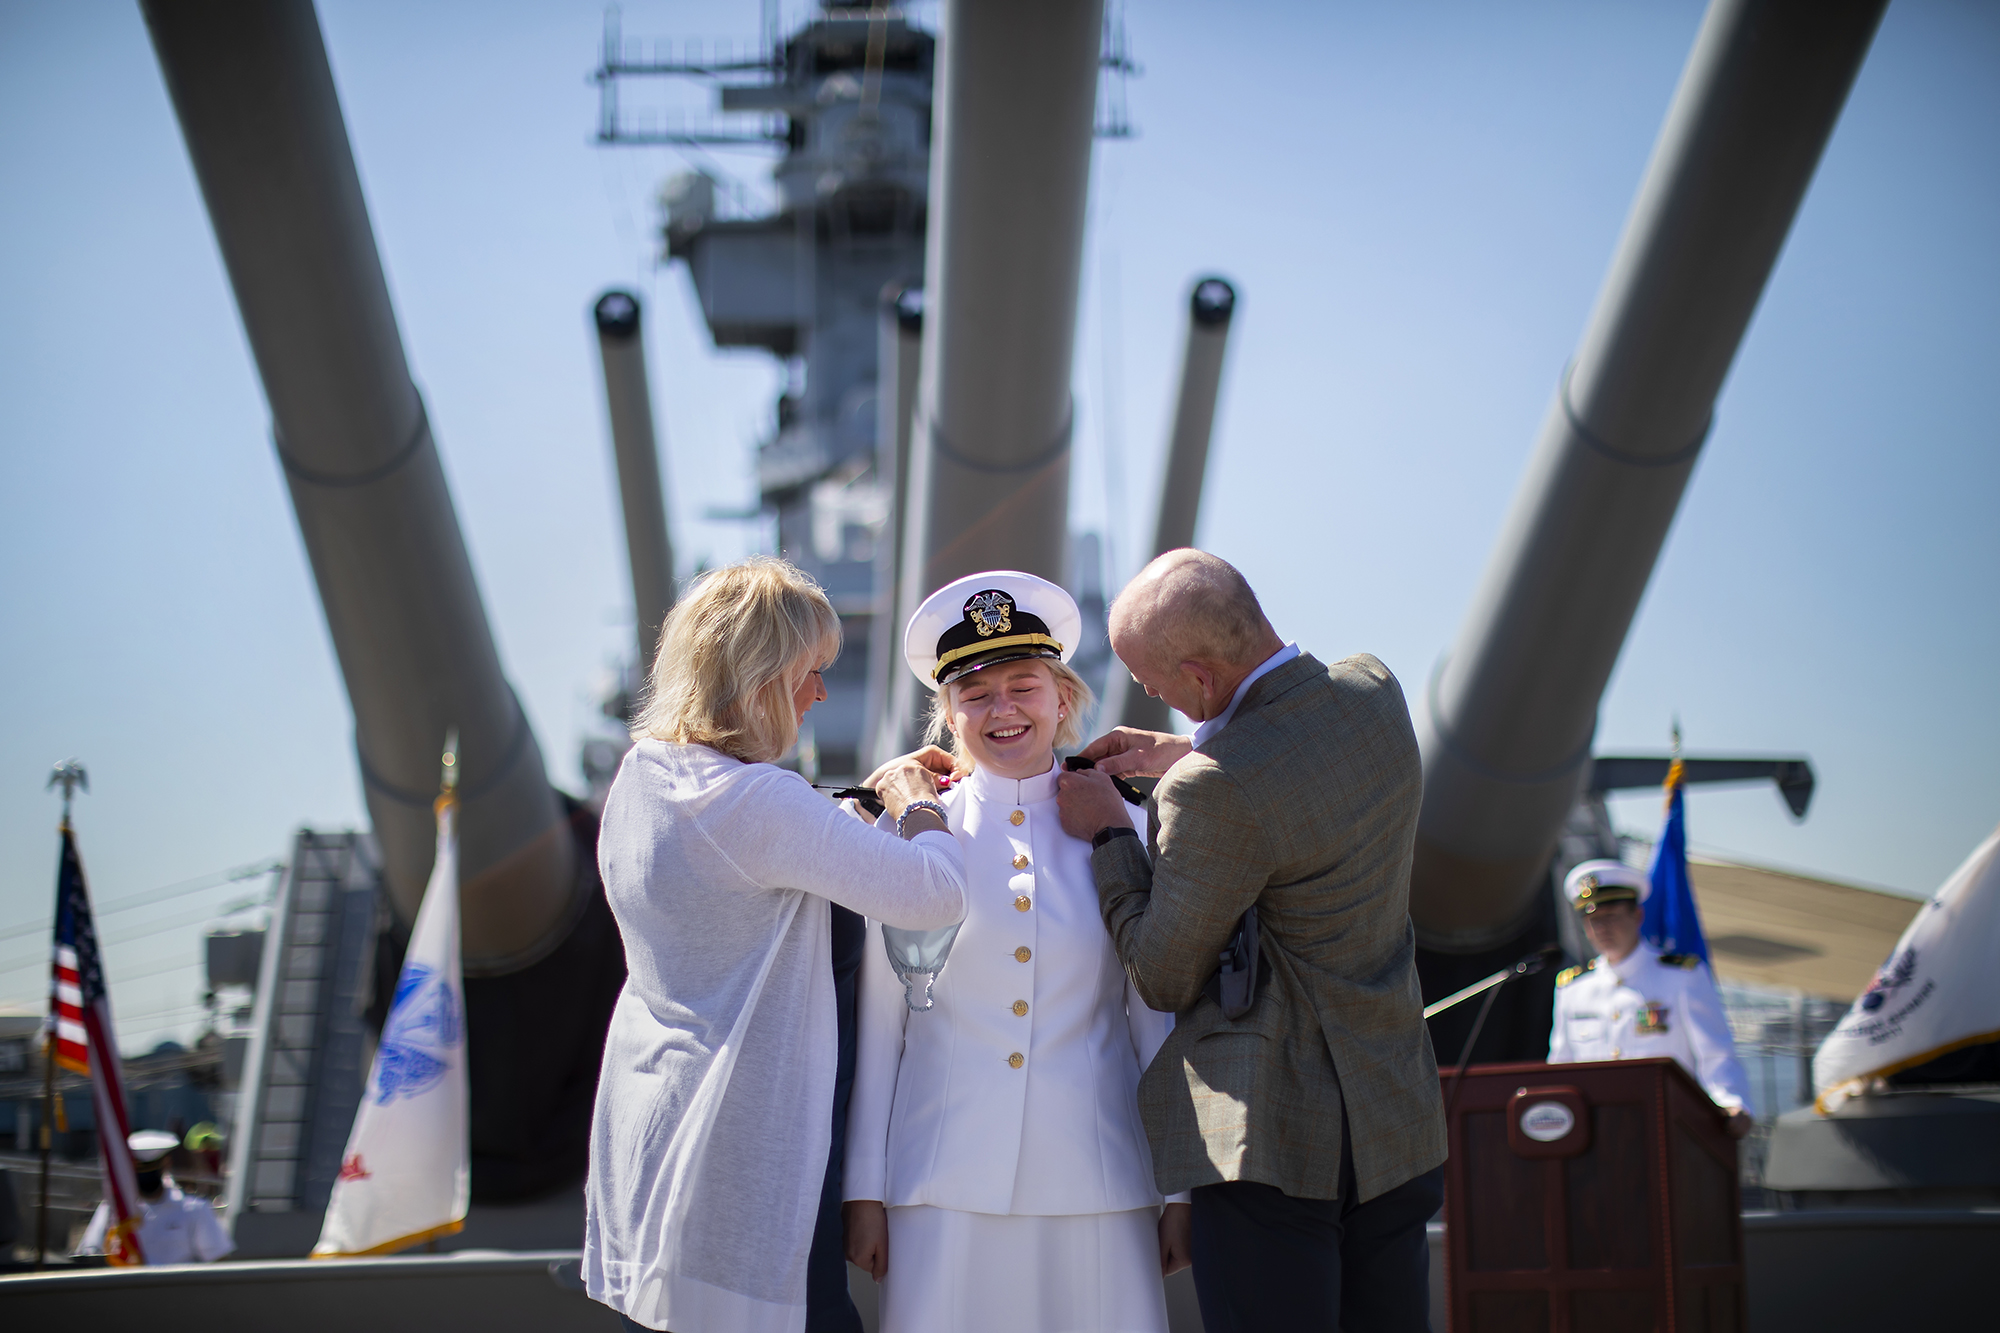 Person in uniform smiles while parents put medals on their uniform aboard the USS New Jersey.